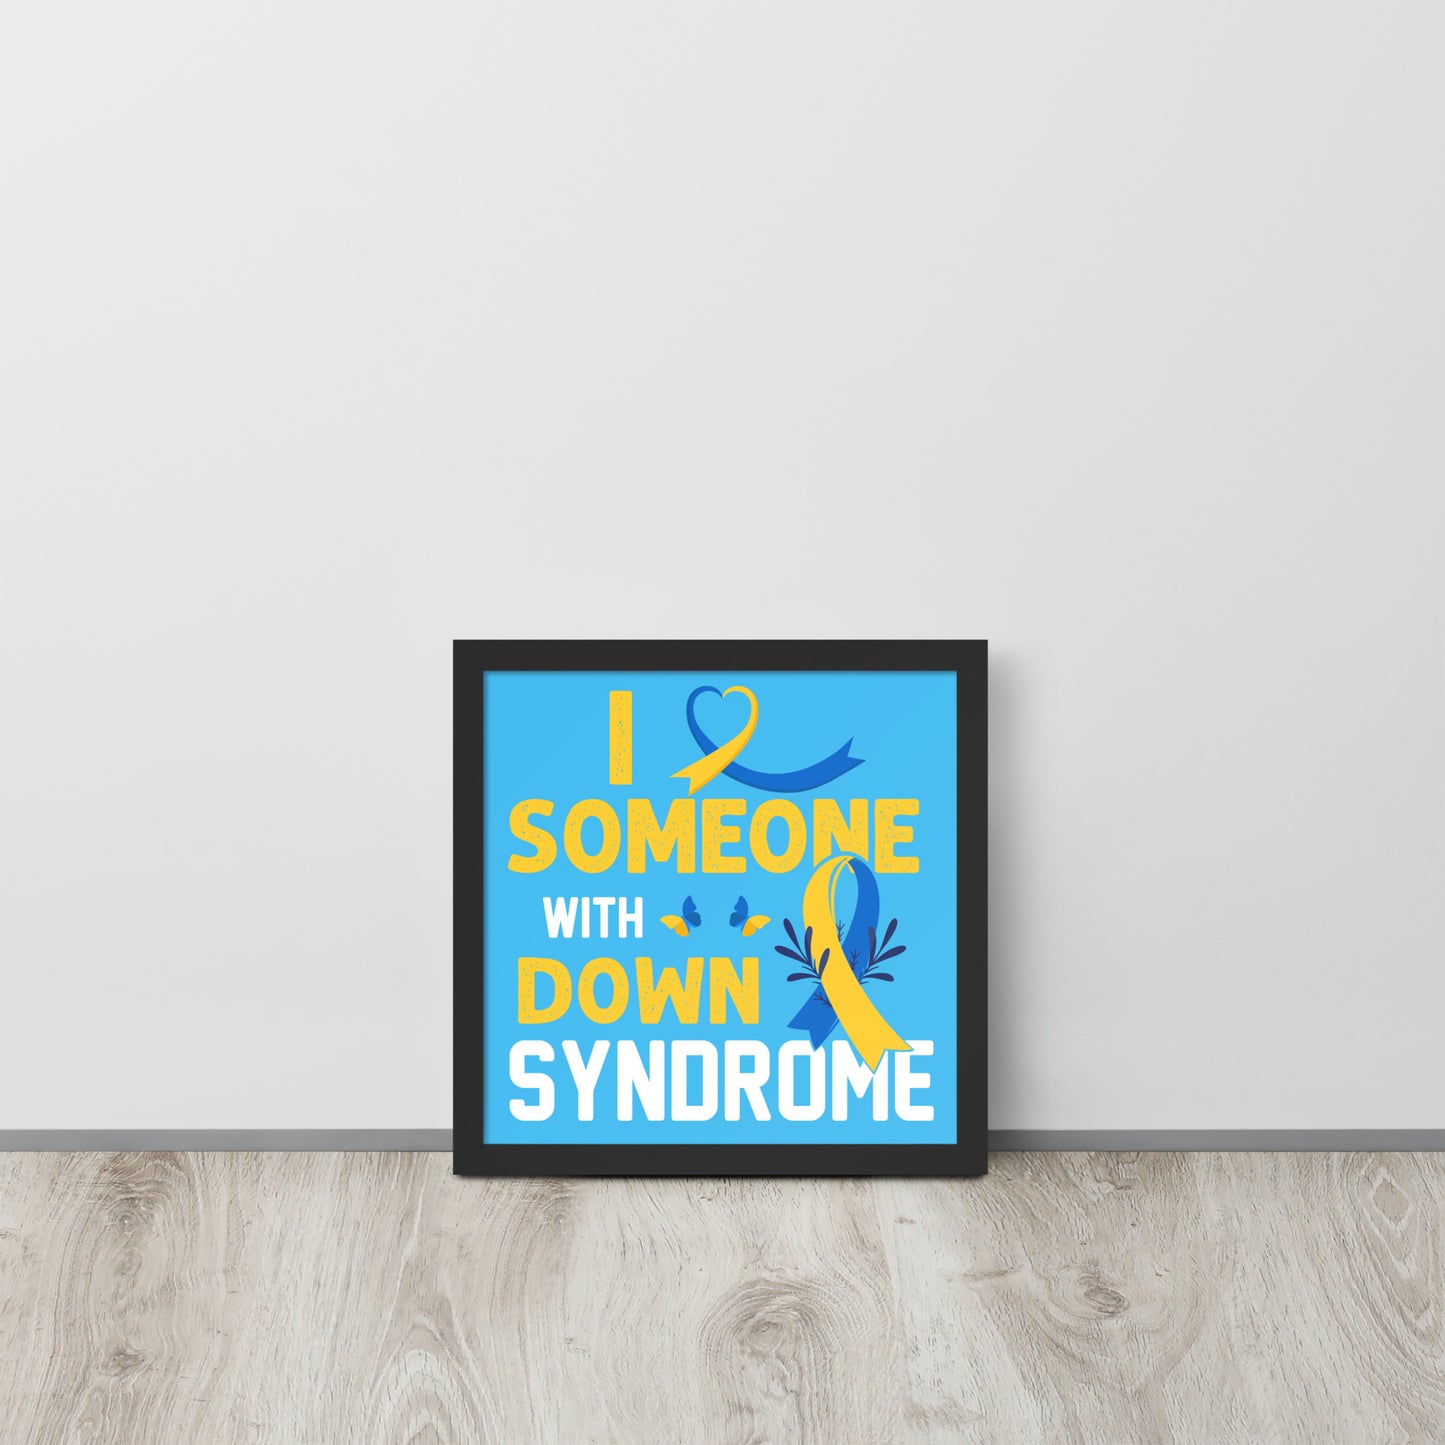 Down Syndrome Awareness Wooden Framed Quality Print